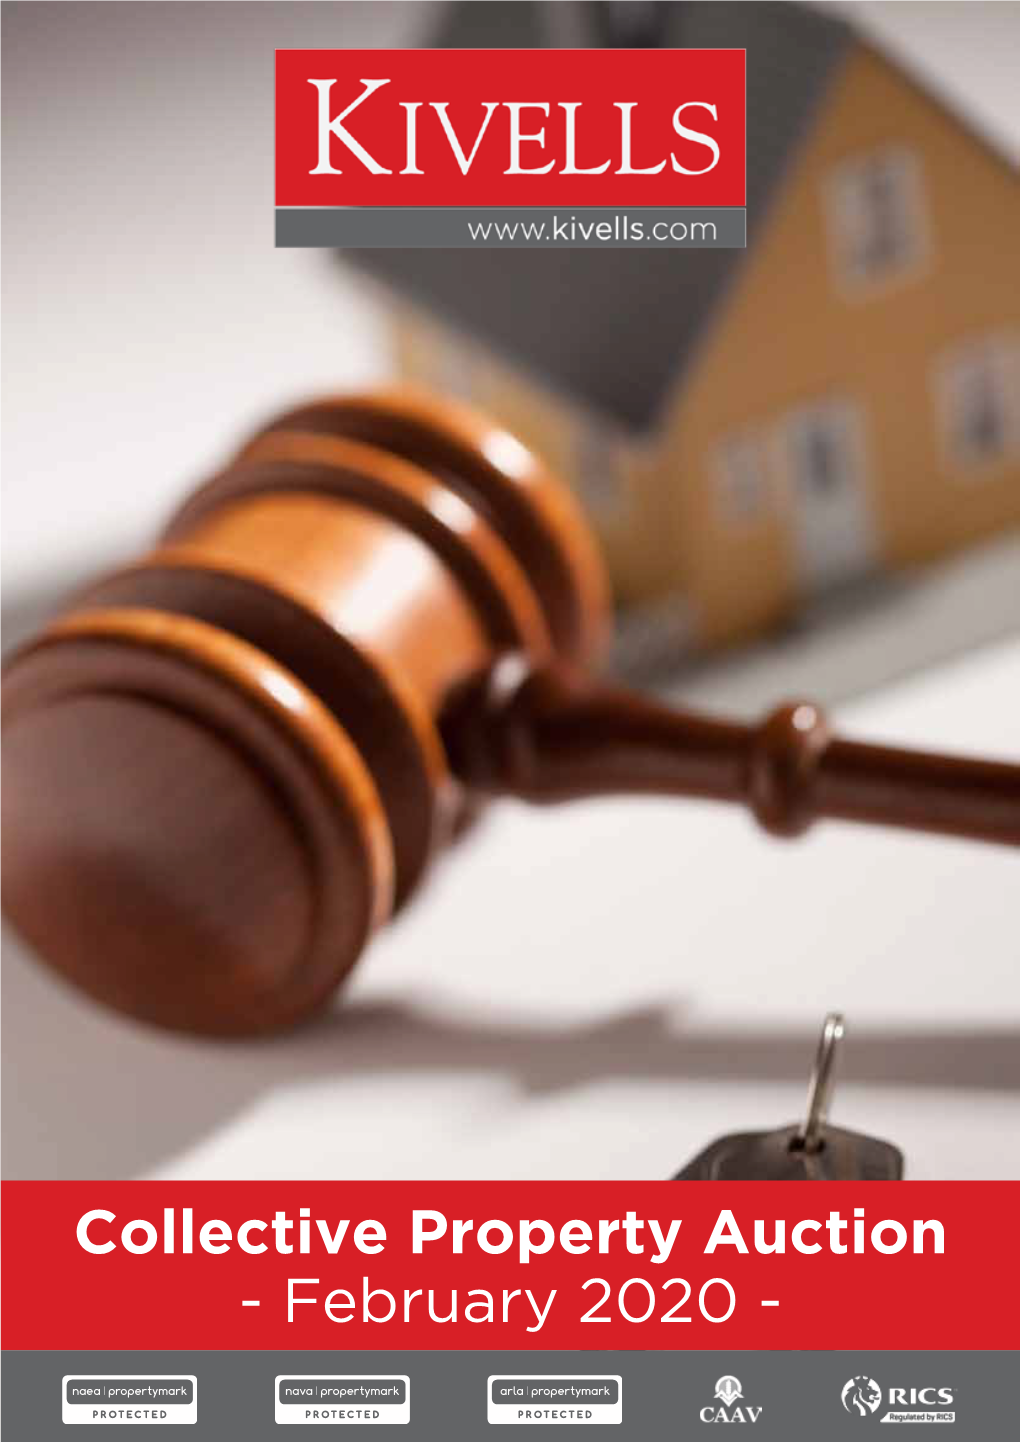 Collective Property Auction - February 2020 - Why Choose Kivells?